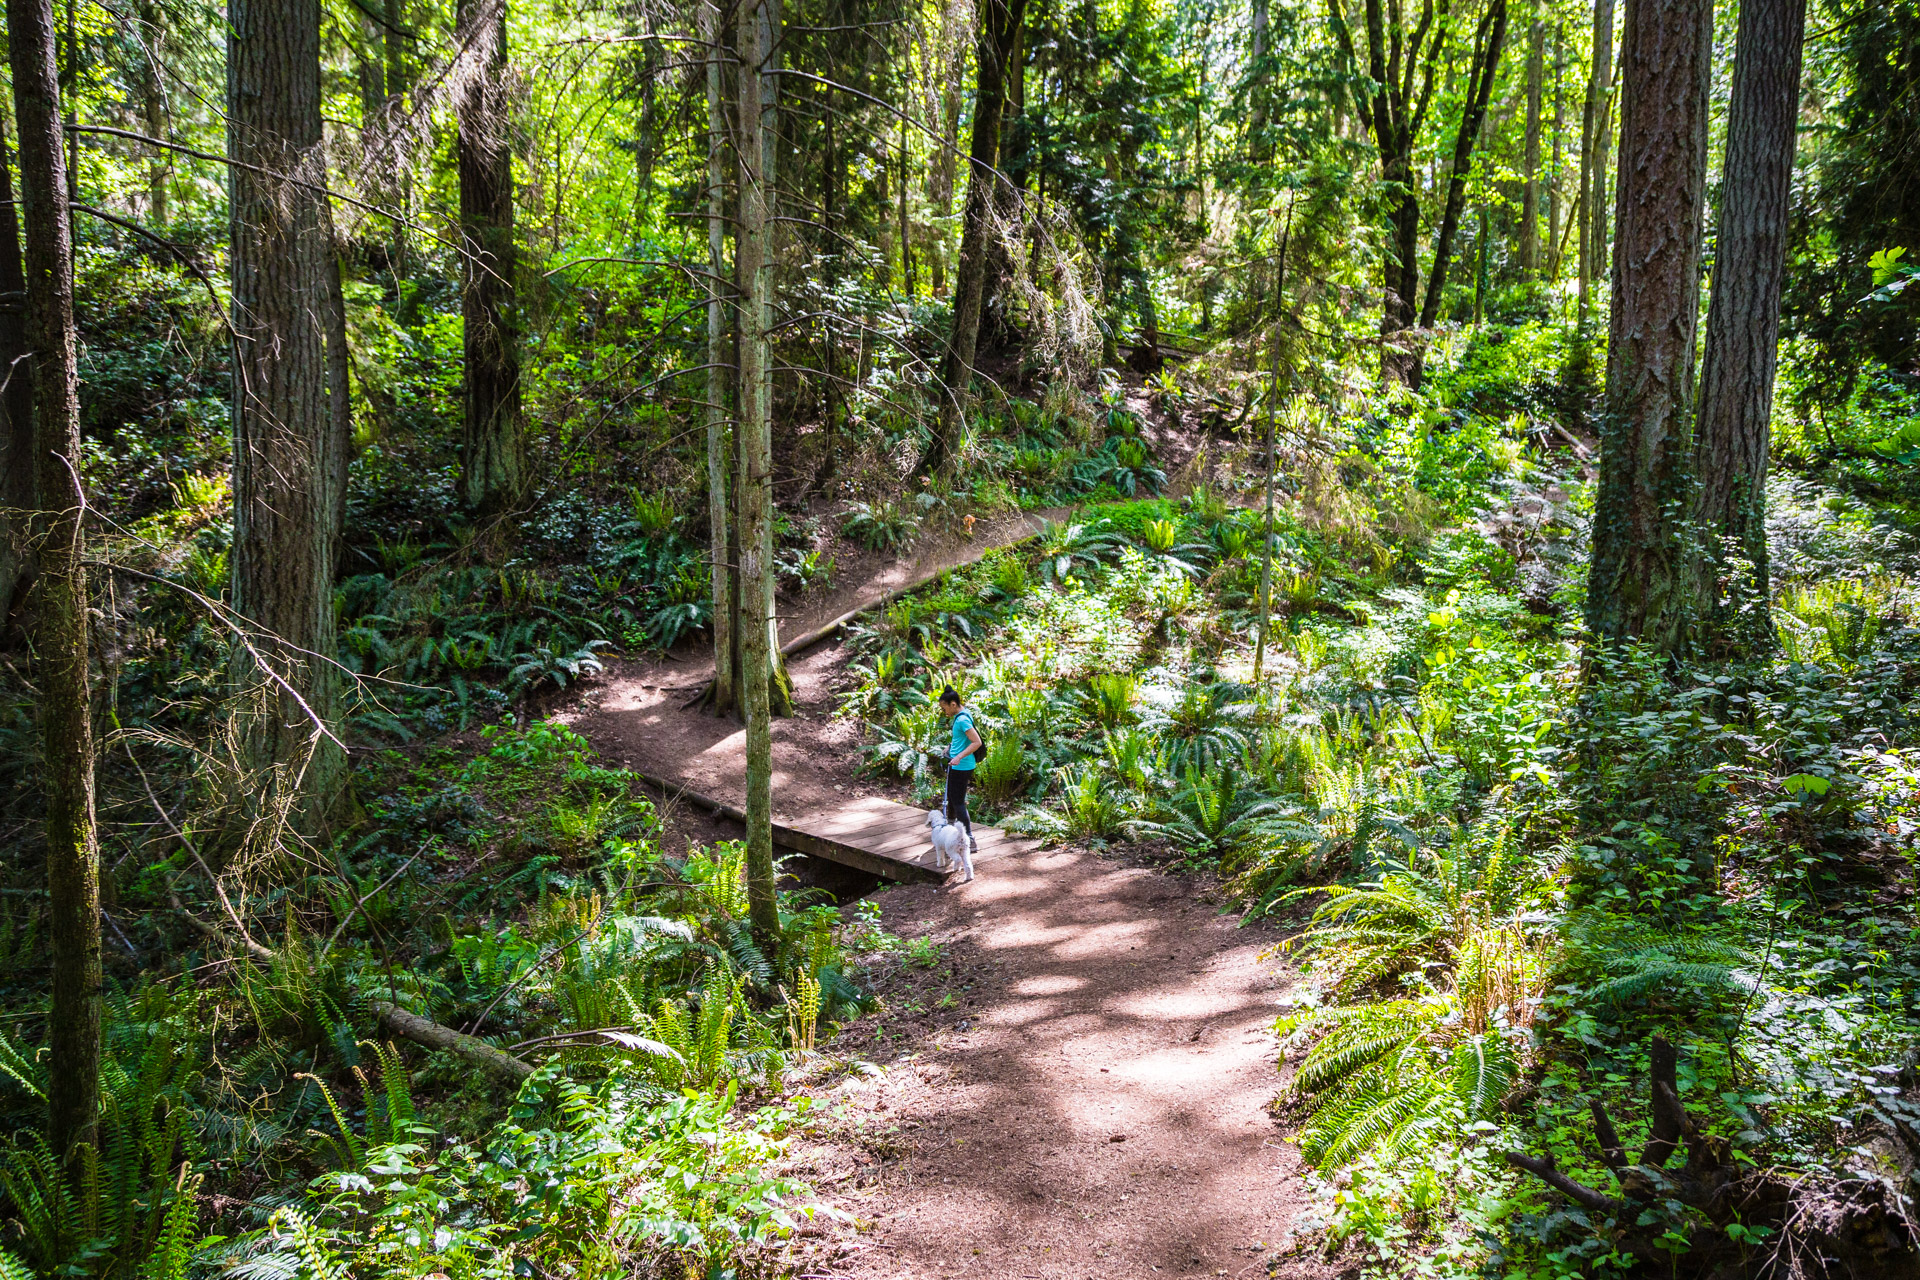 Introducing Prana To Hiking At An Urban Forest In Bellevue - Roadesque